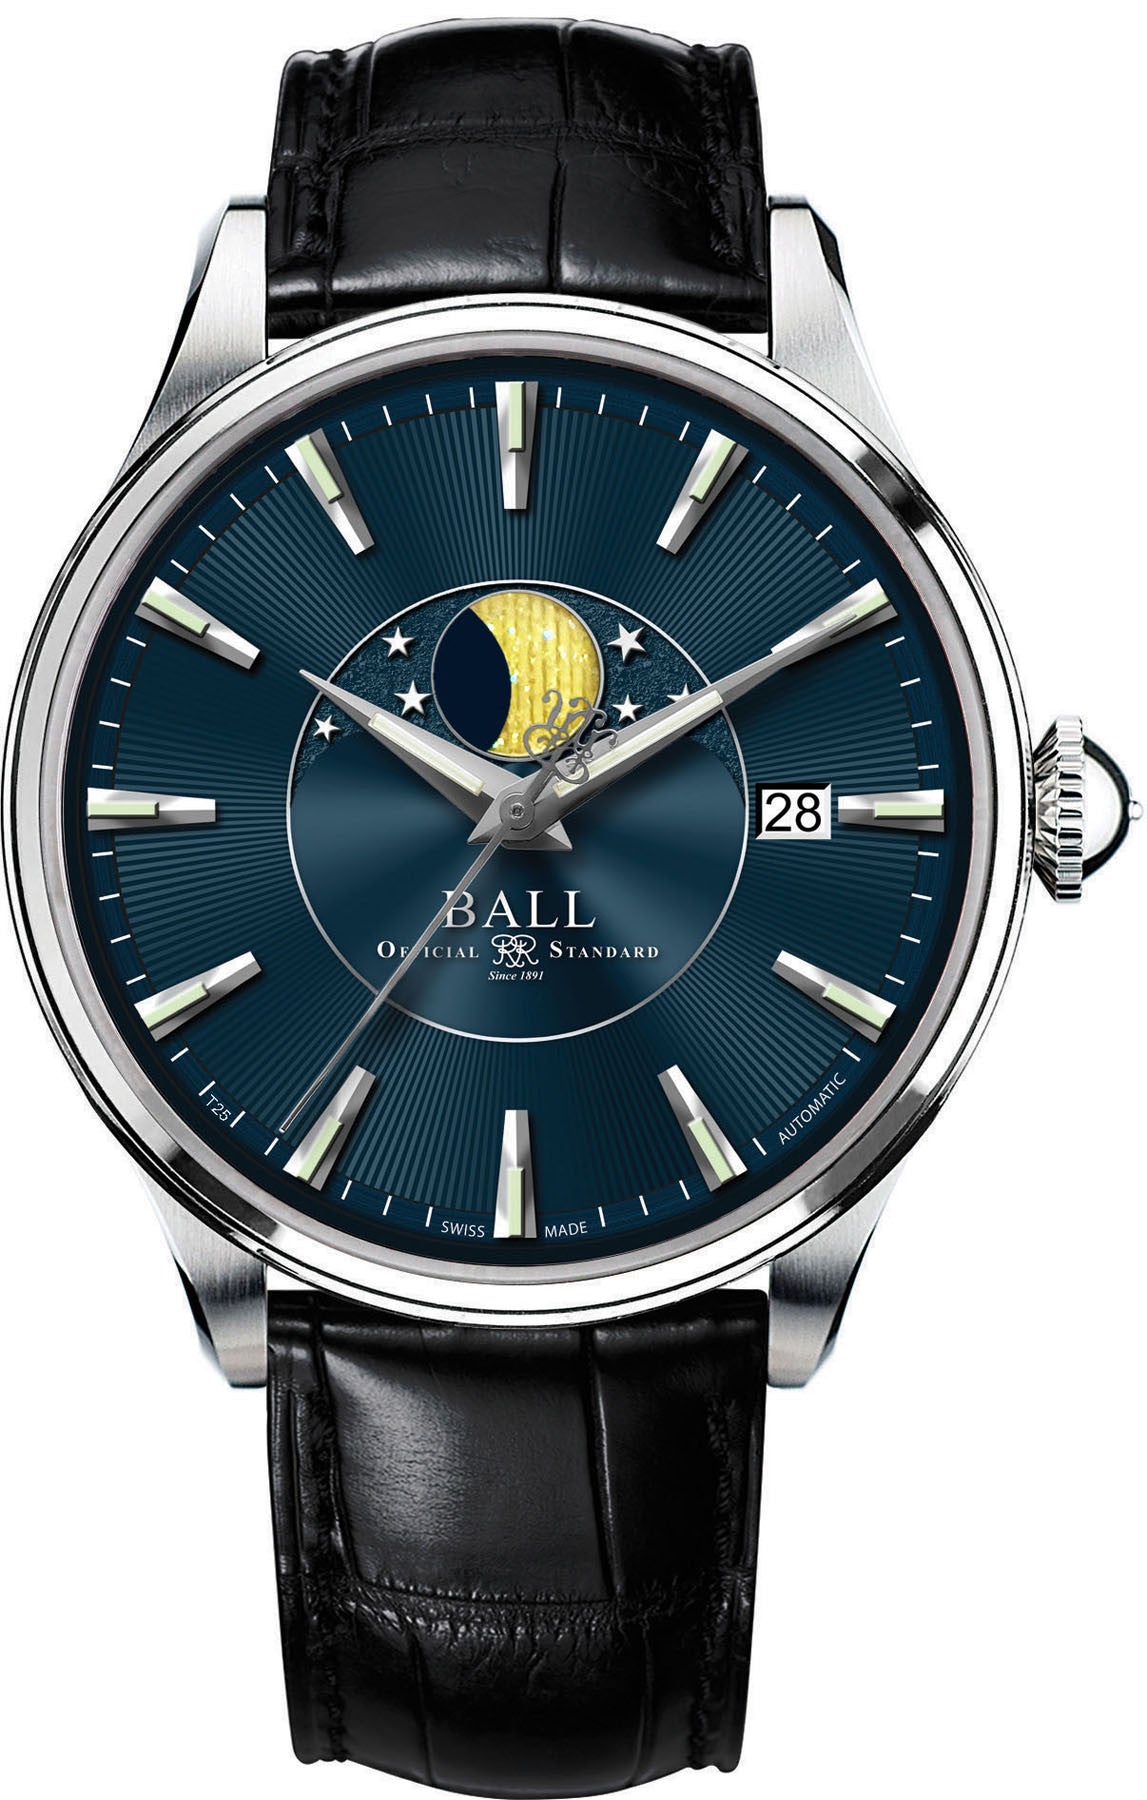 Photos - Wrist Watch Ball Watch Company Trainmaster Moon Phase - Blue BL-1510 